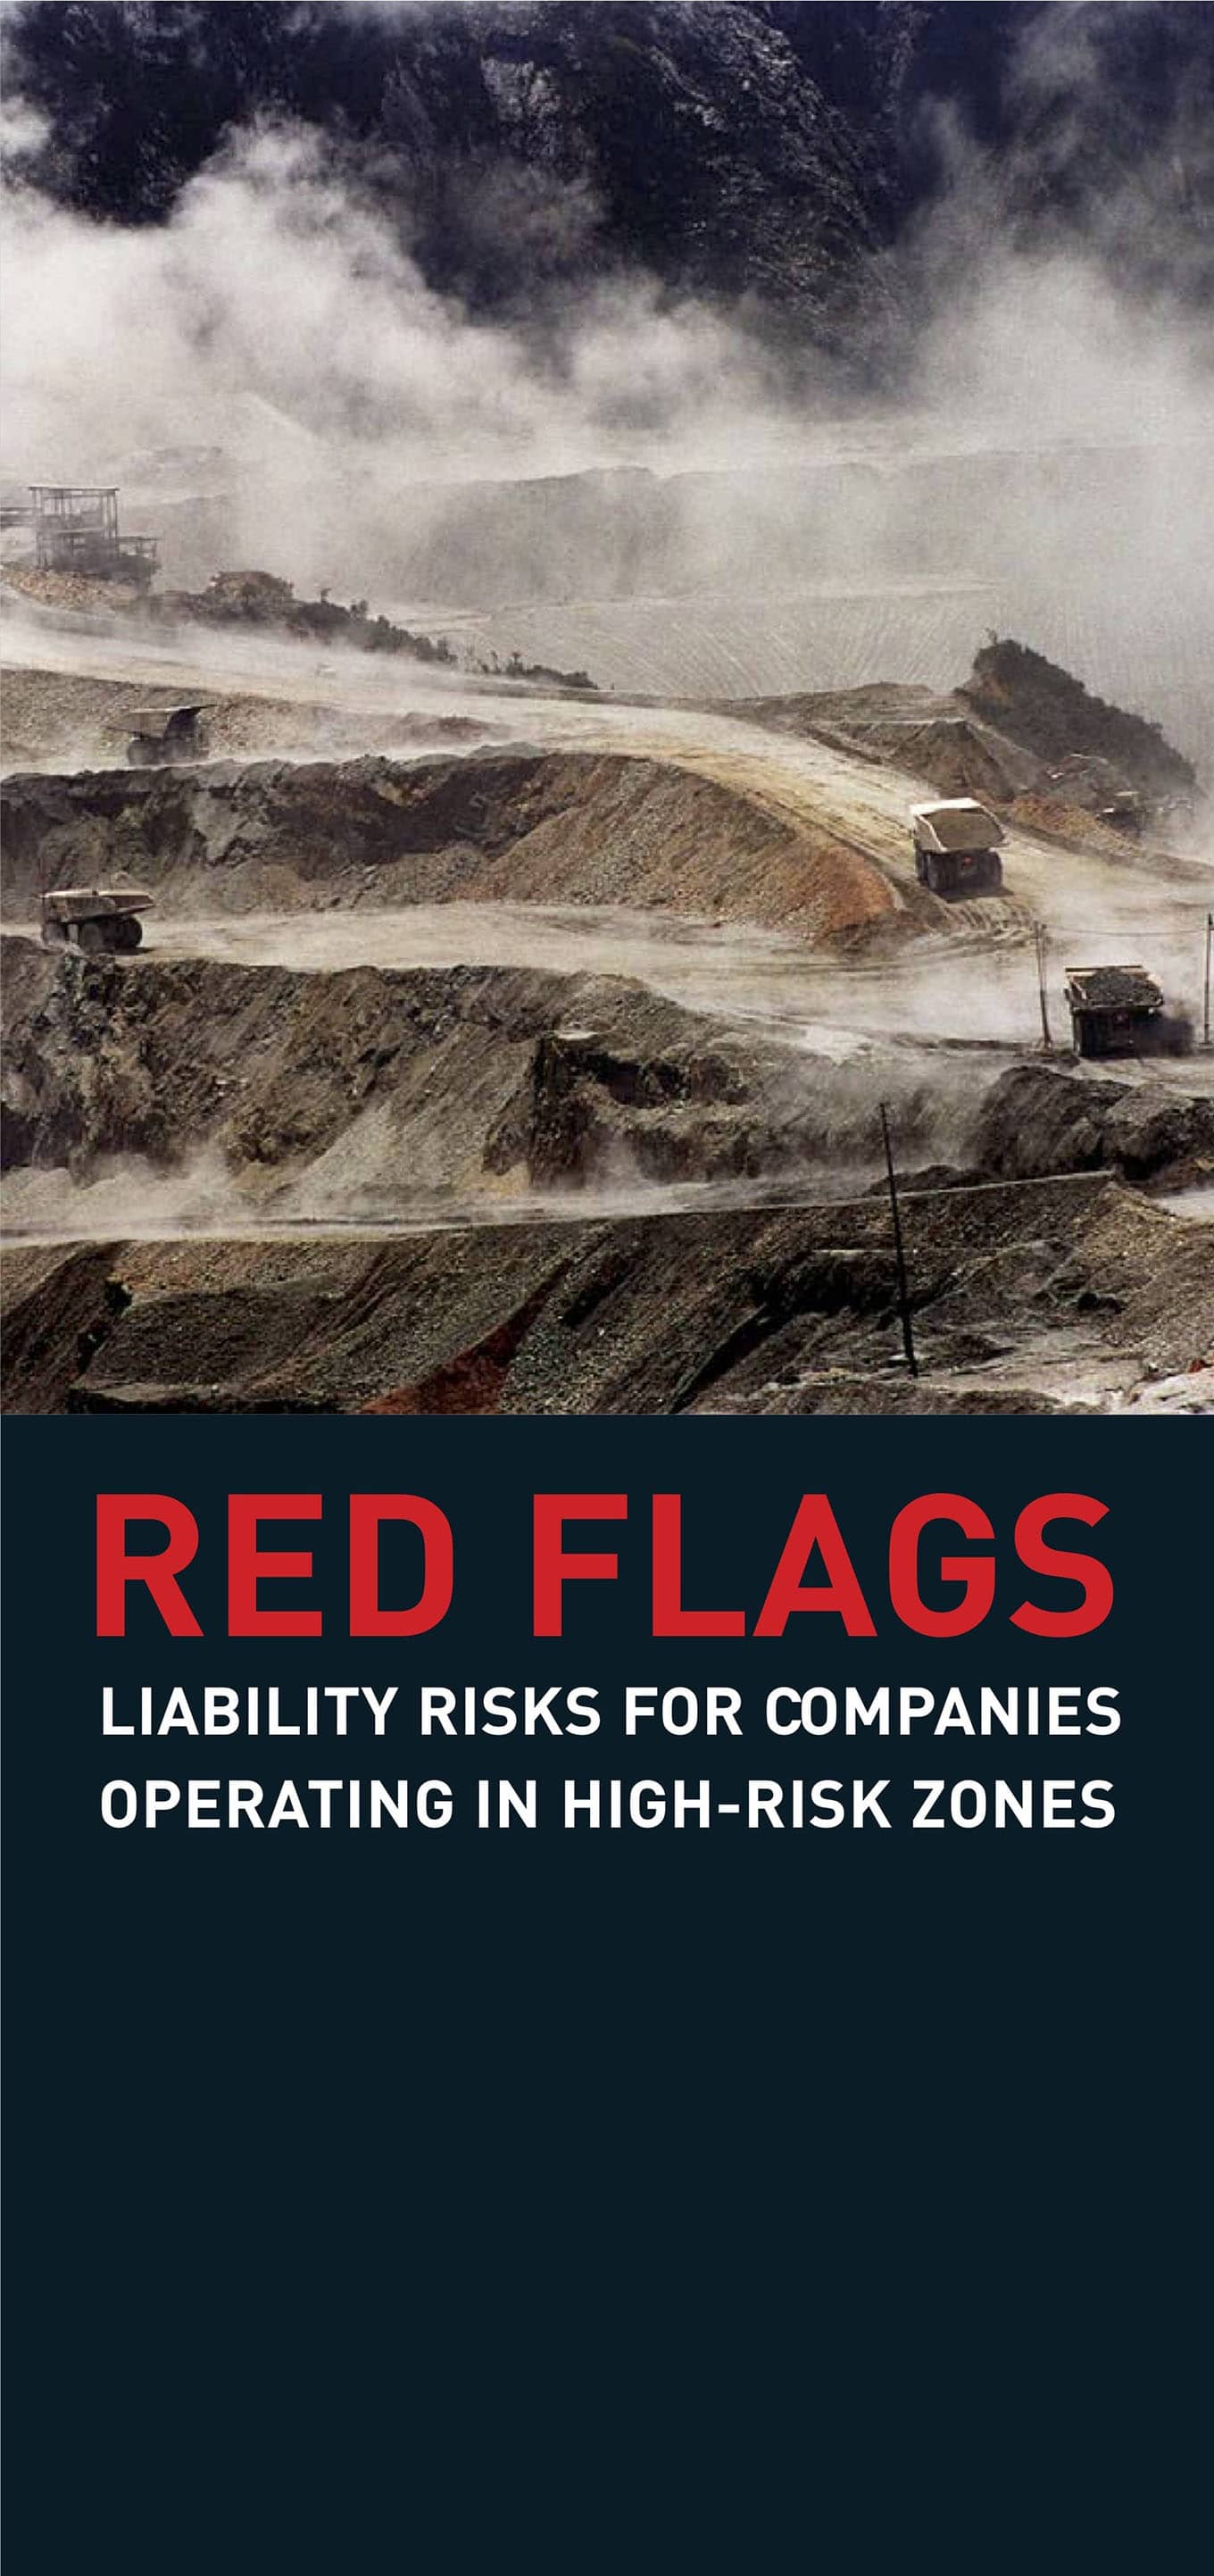 Red Flags - Liability Risks for Companies Operating in High-risk Zones